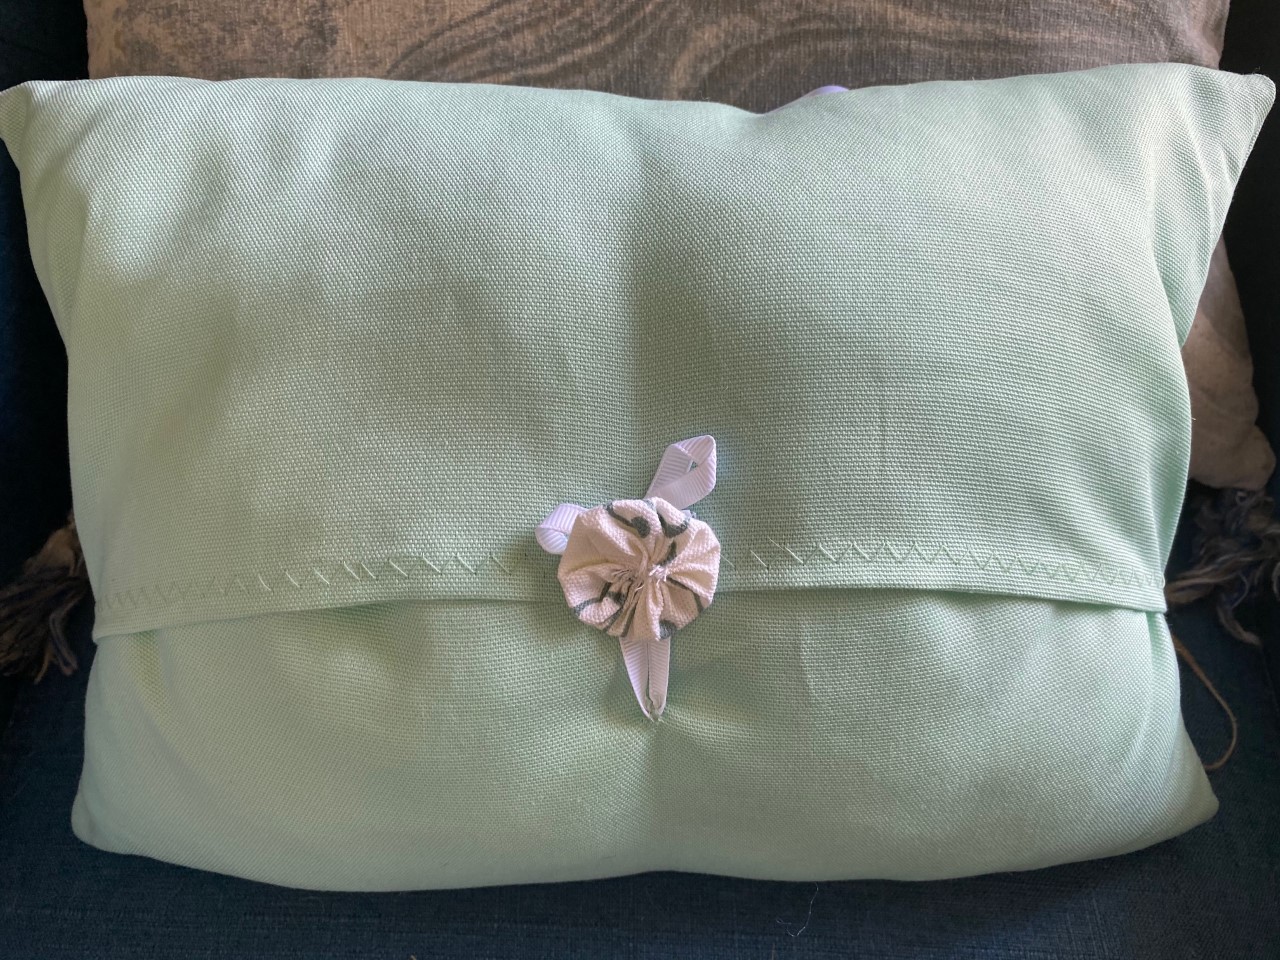 Fleece 13″ Pillow Project WITH FLEECE RIBBON AND PLASTIC NEEDLE - Choose From Many Fabric Options, includes Pillow Insert